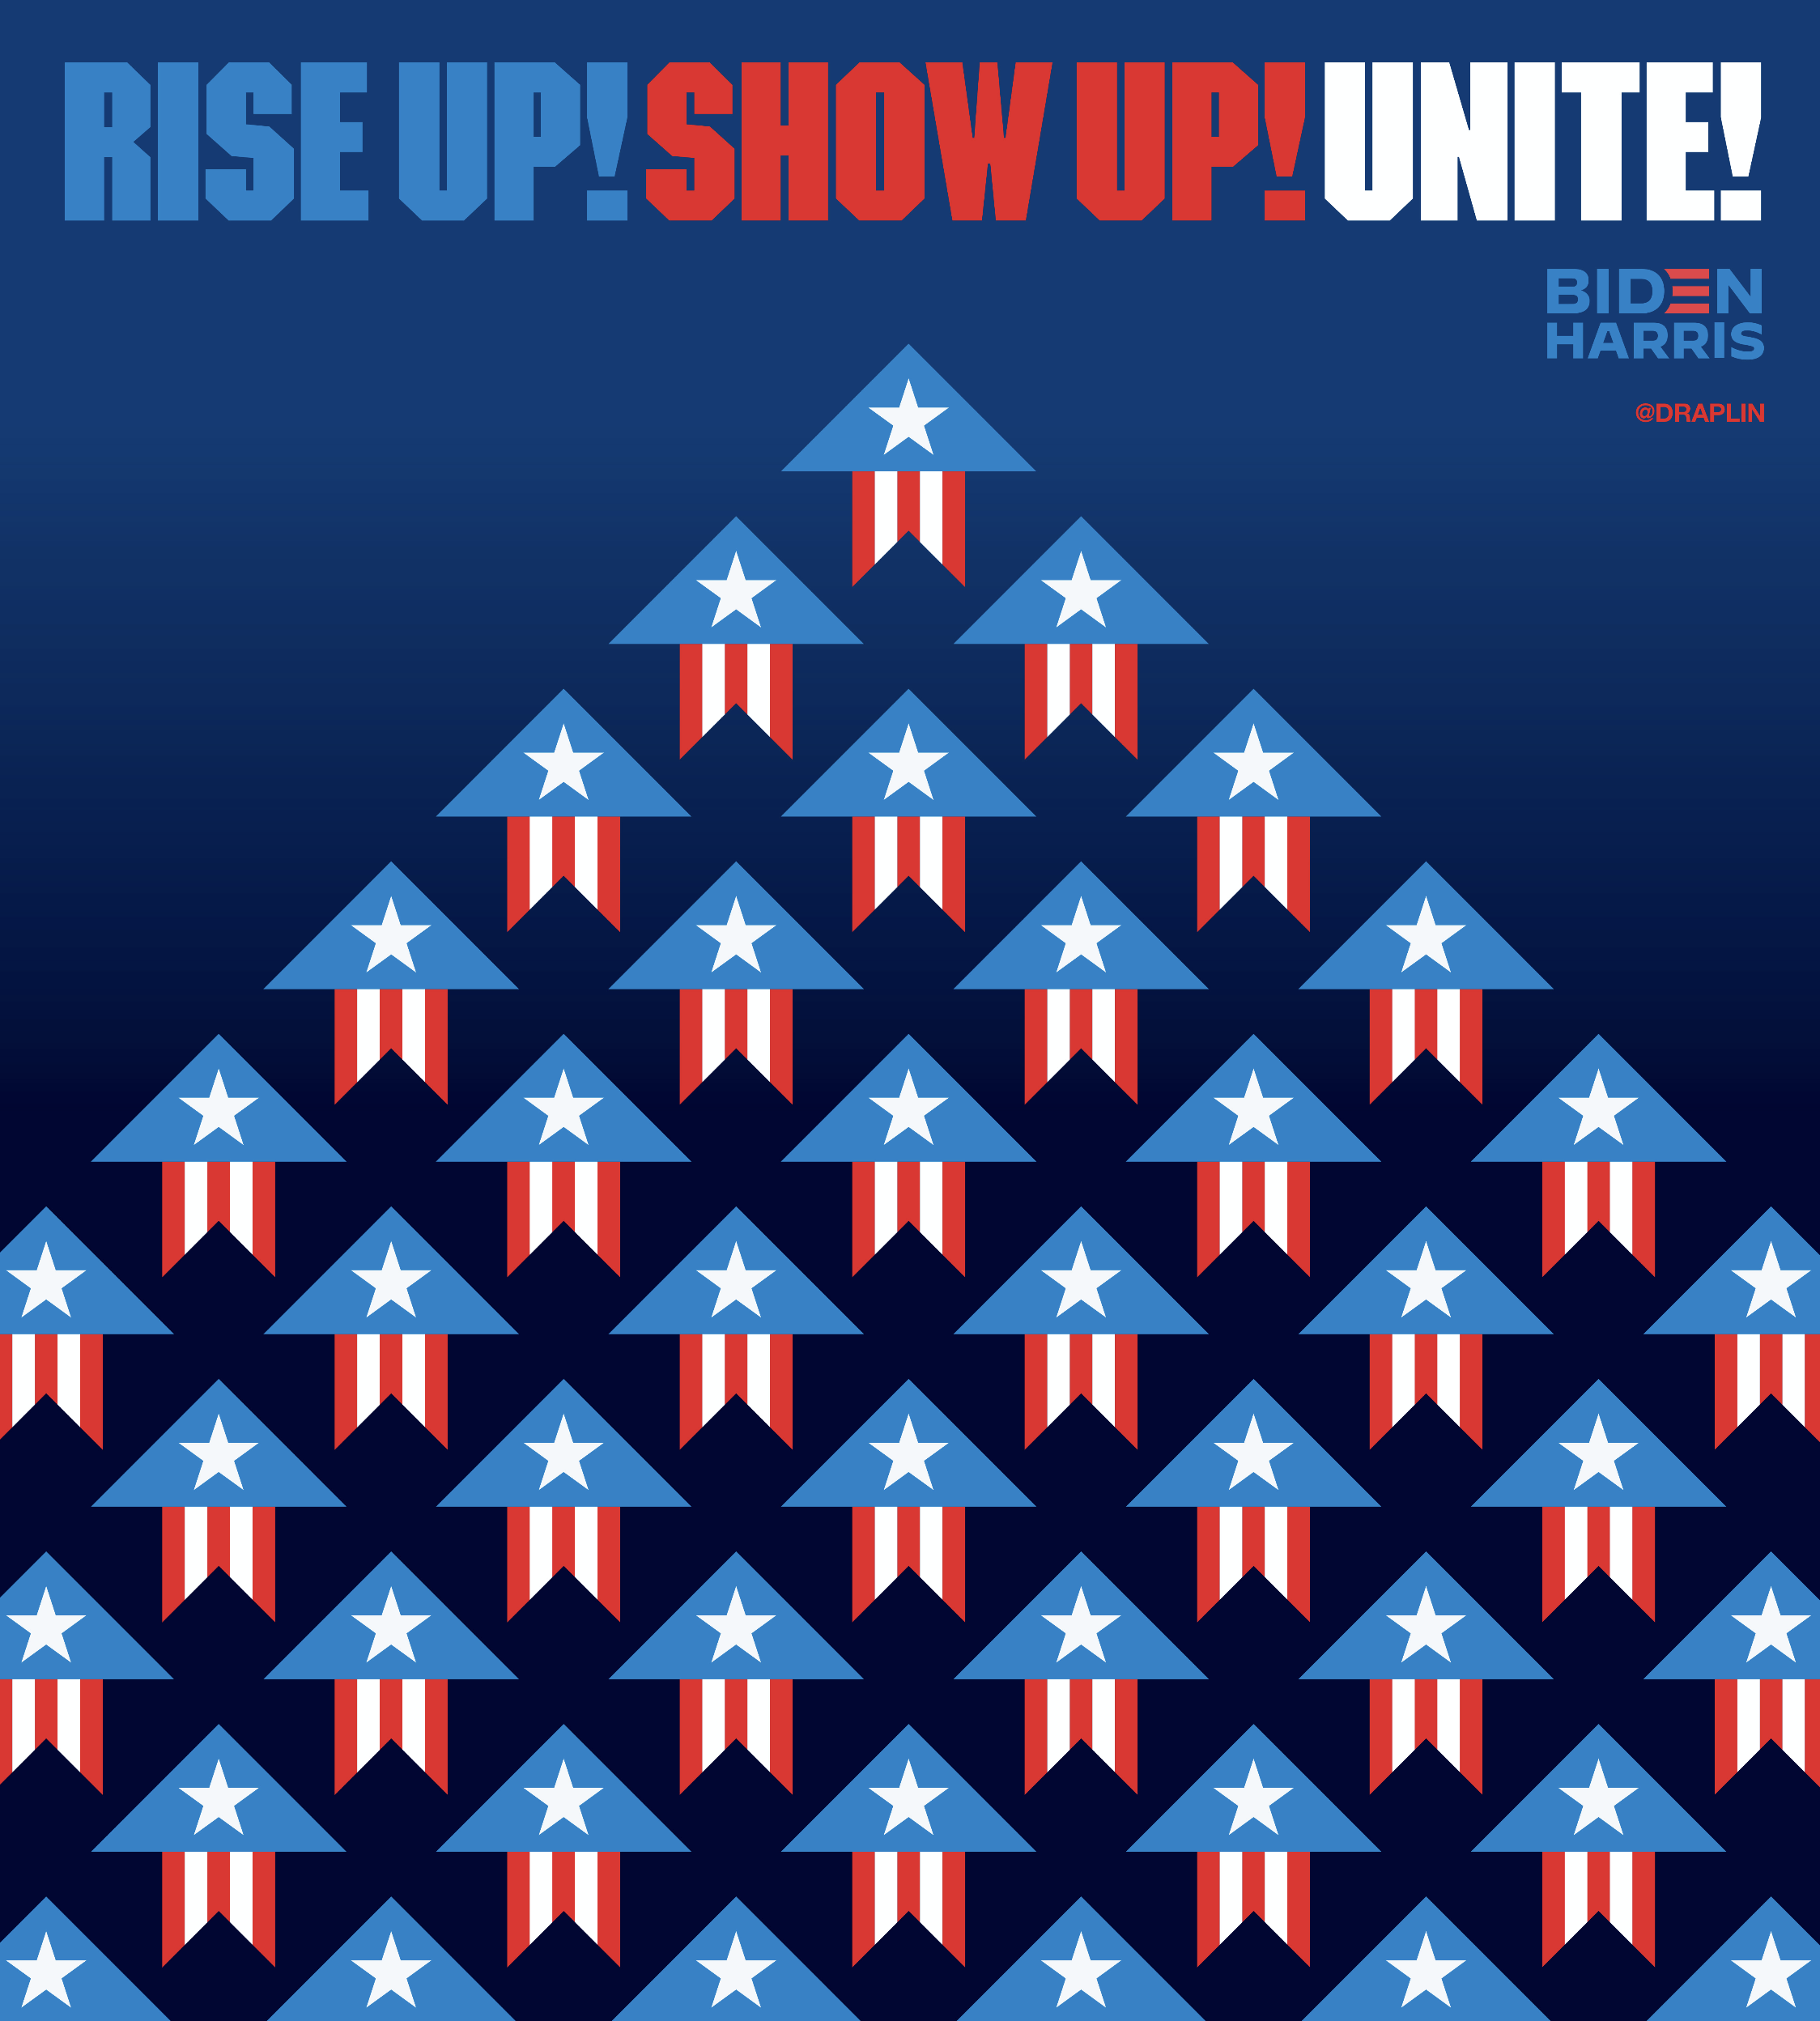 Lettering art of the phrase 'Rise up. Show up. Unite!' by Aaron Draplin